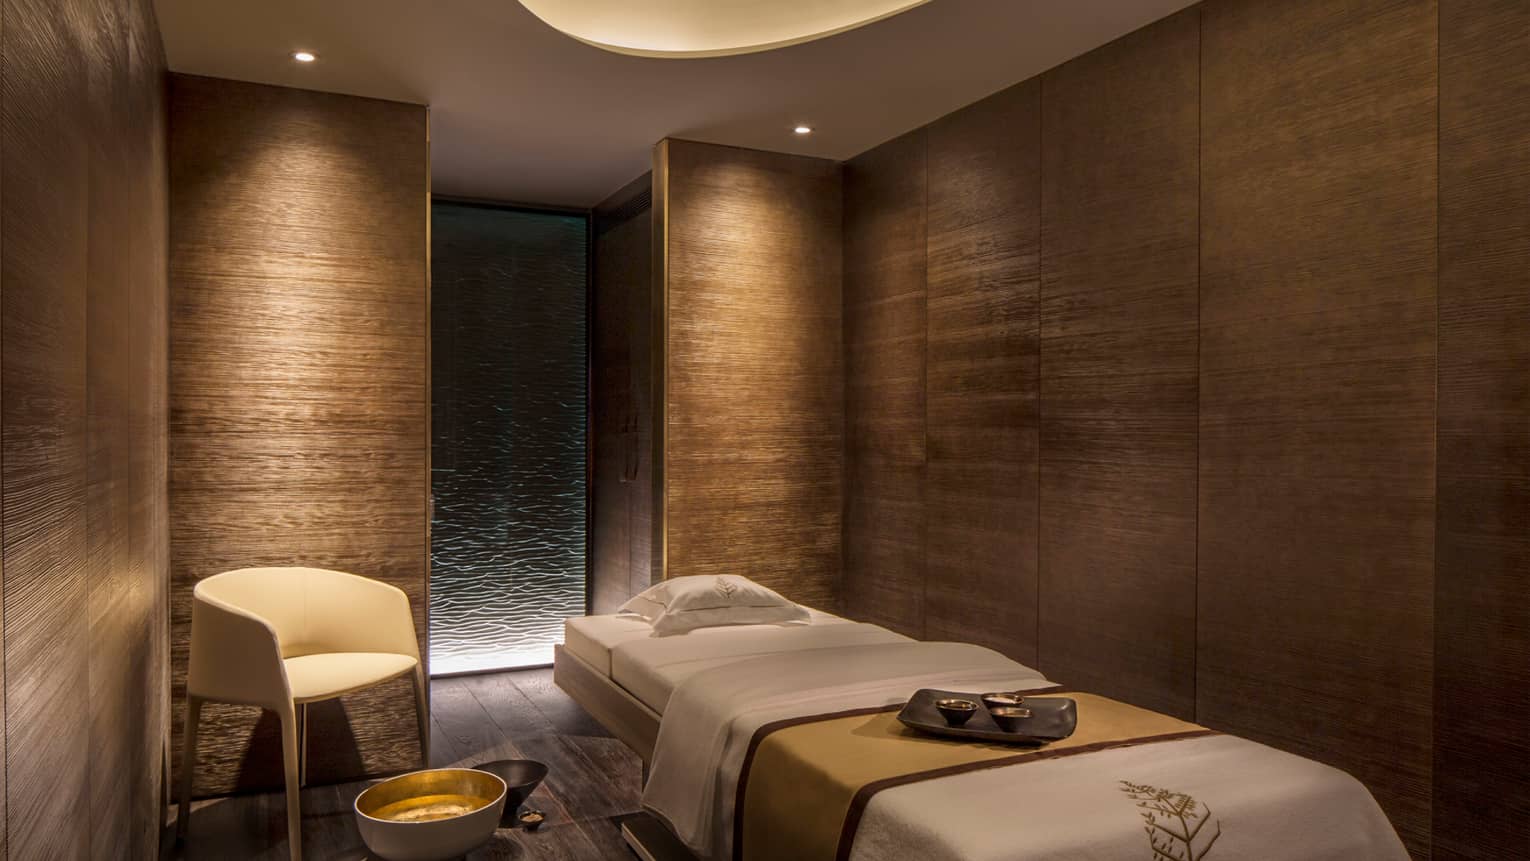 View of private massage room in spa and wellness centre, wood grain walls and low lighting